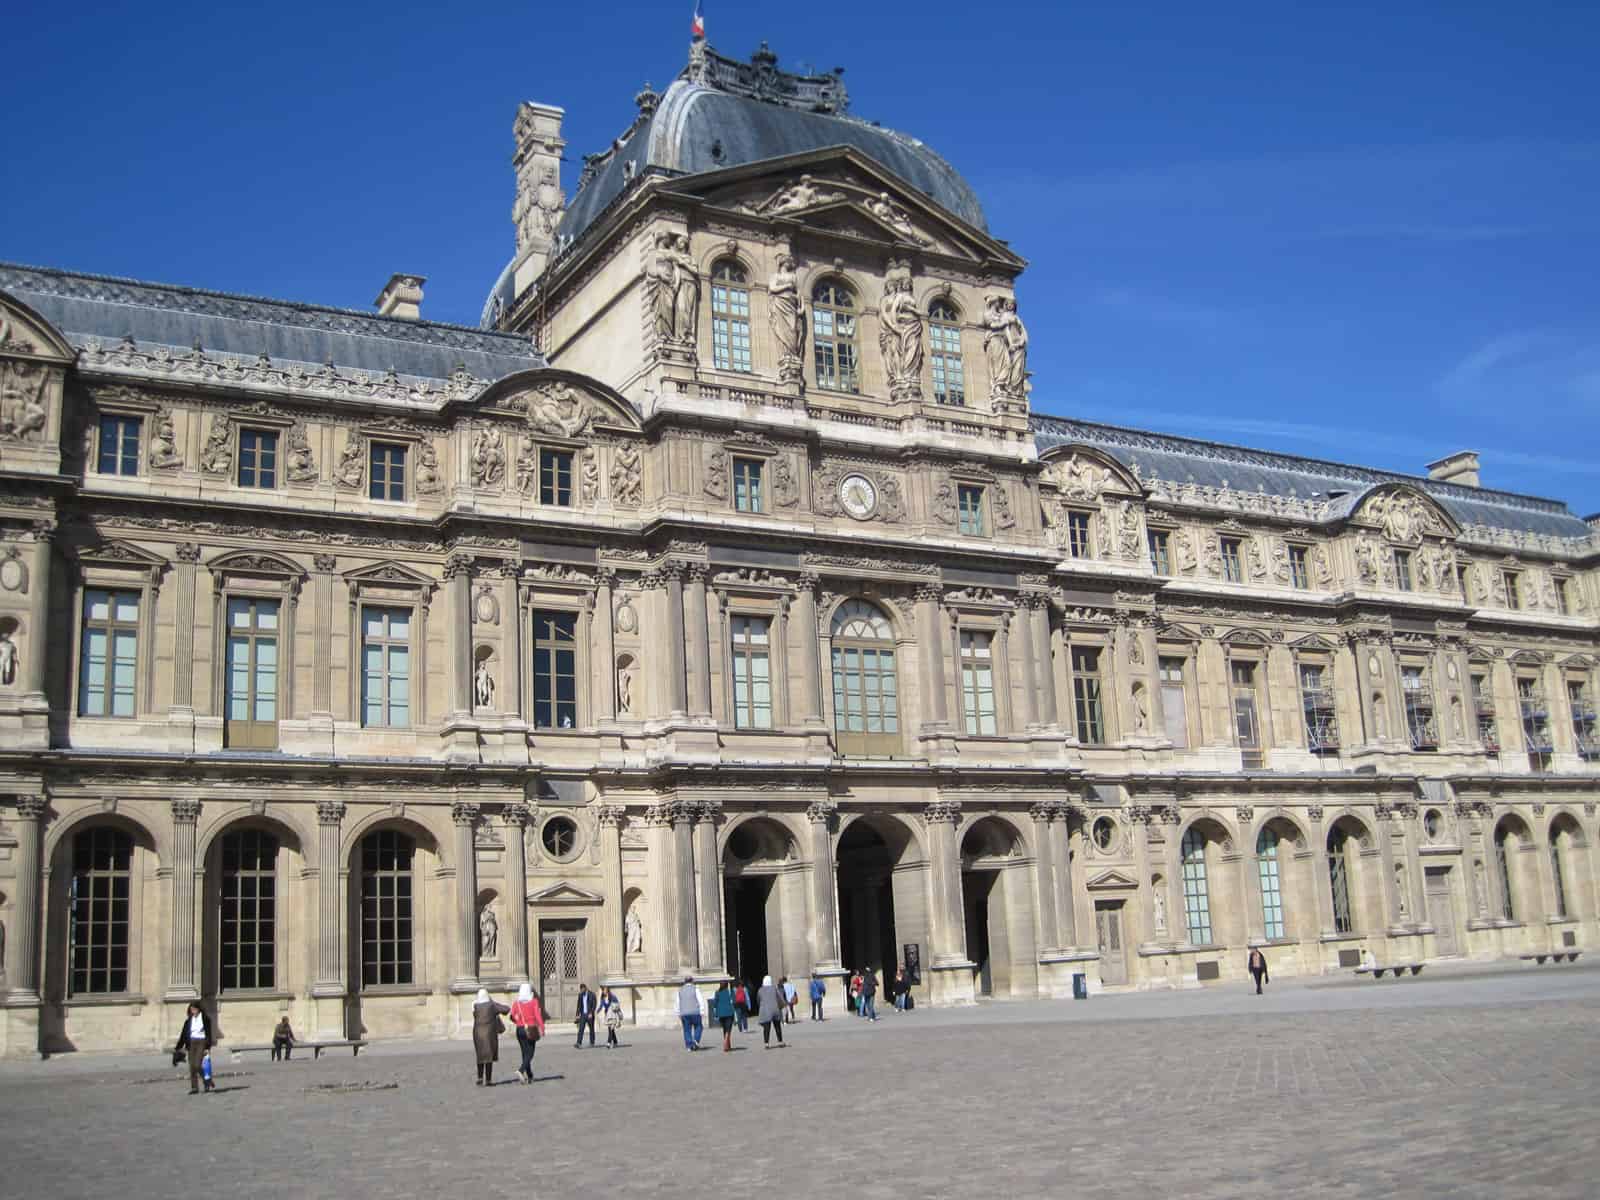 Stroll 4 The Louvre's Cour Caree